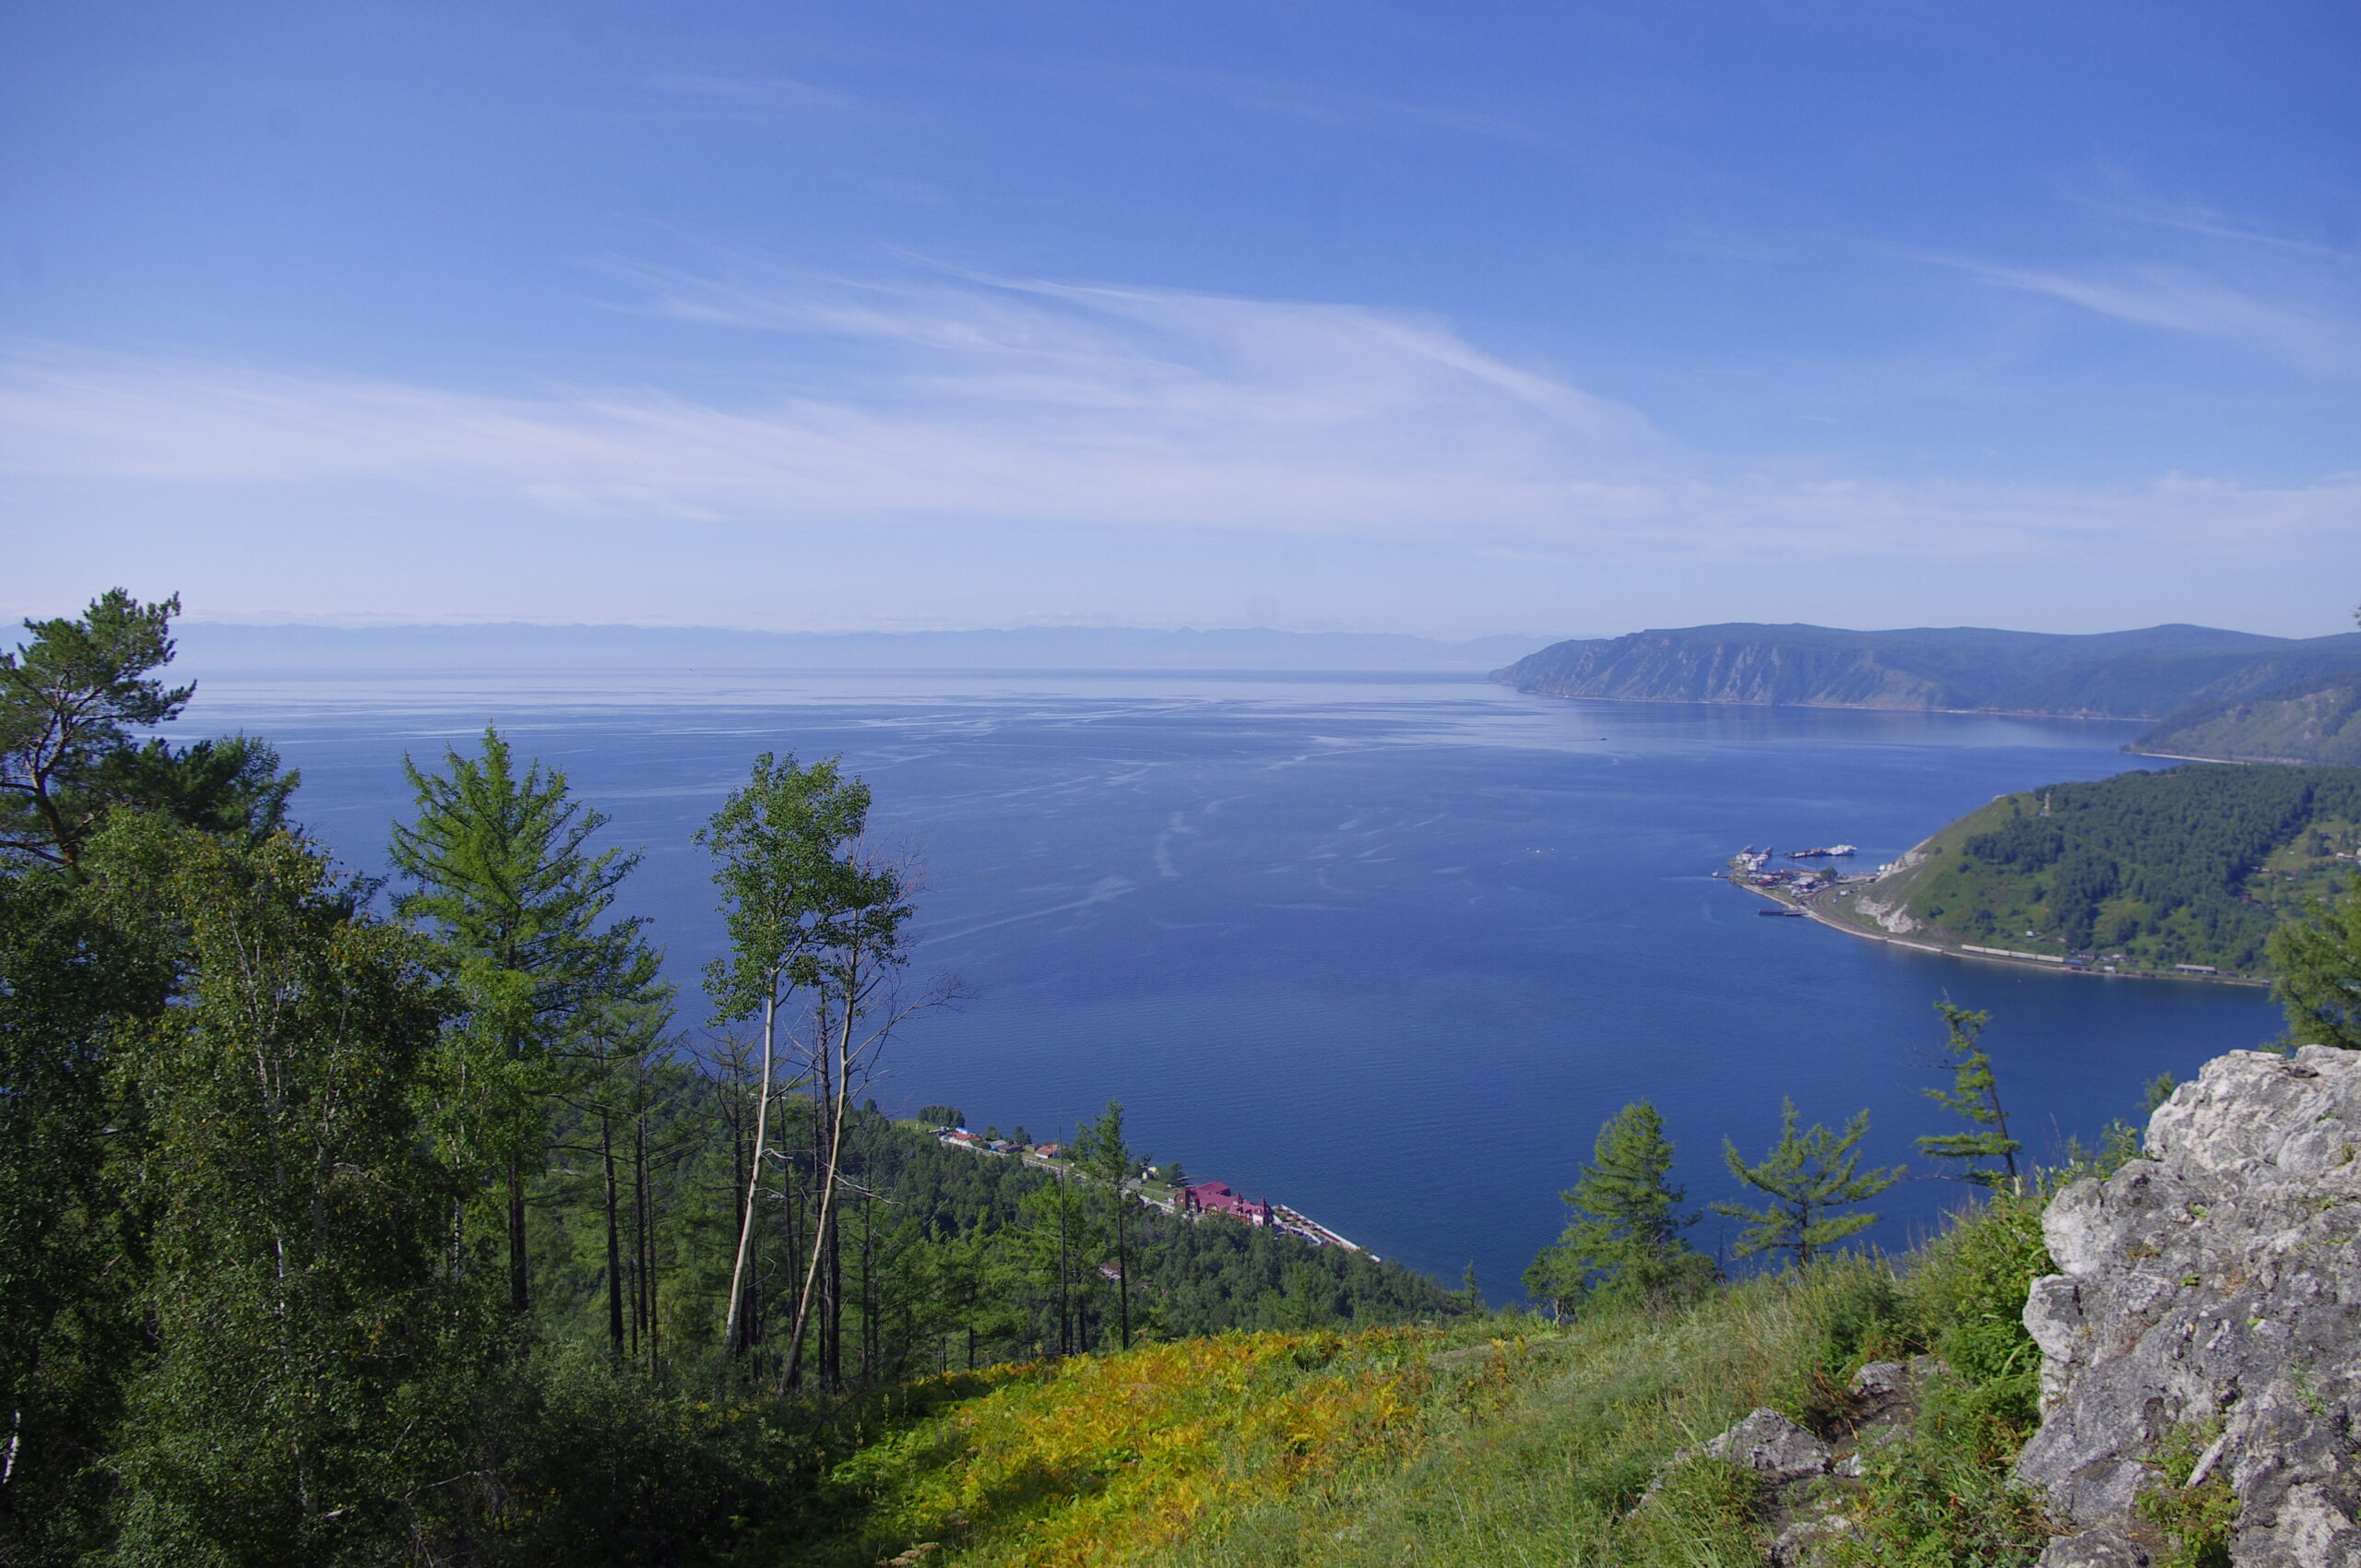 The world’s oldest, deepest lake is full of life. Humans are changing that.